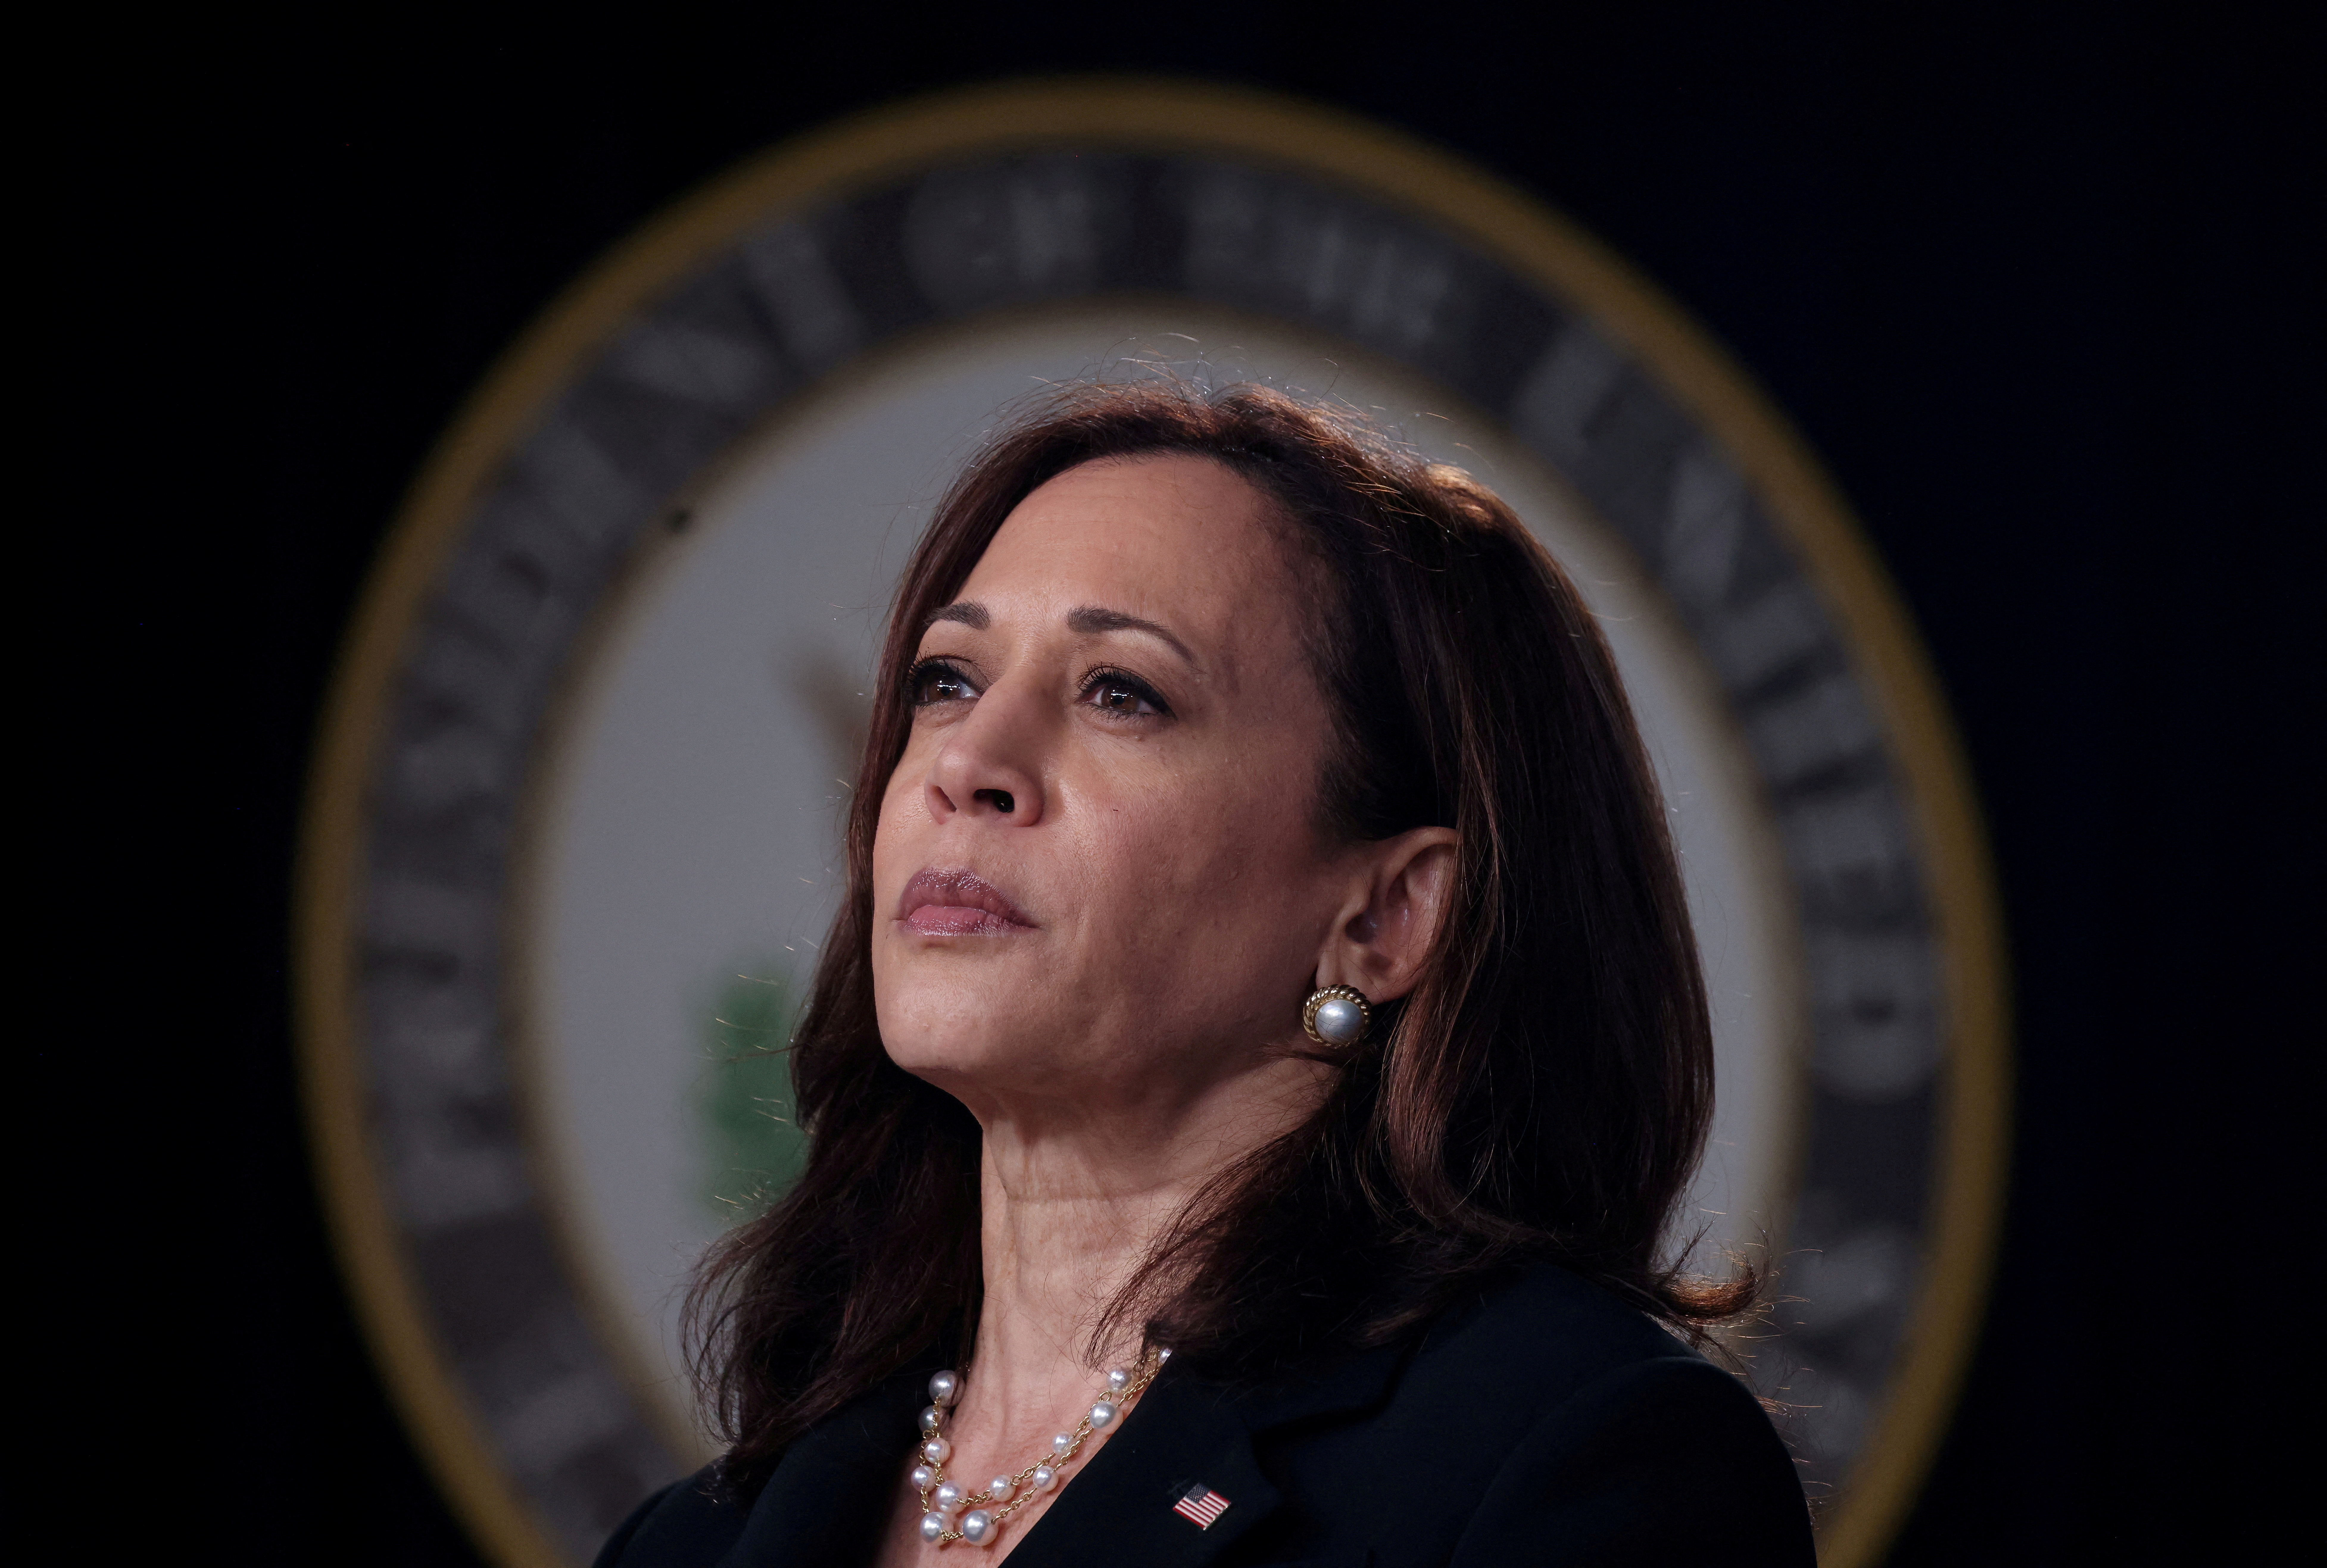 Many Democrats back Harris in 2024 race, but Pelosi, Obama silent